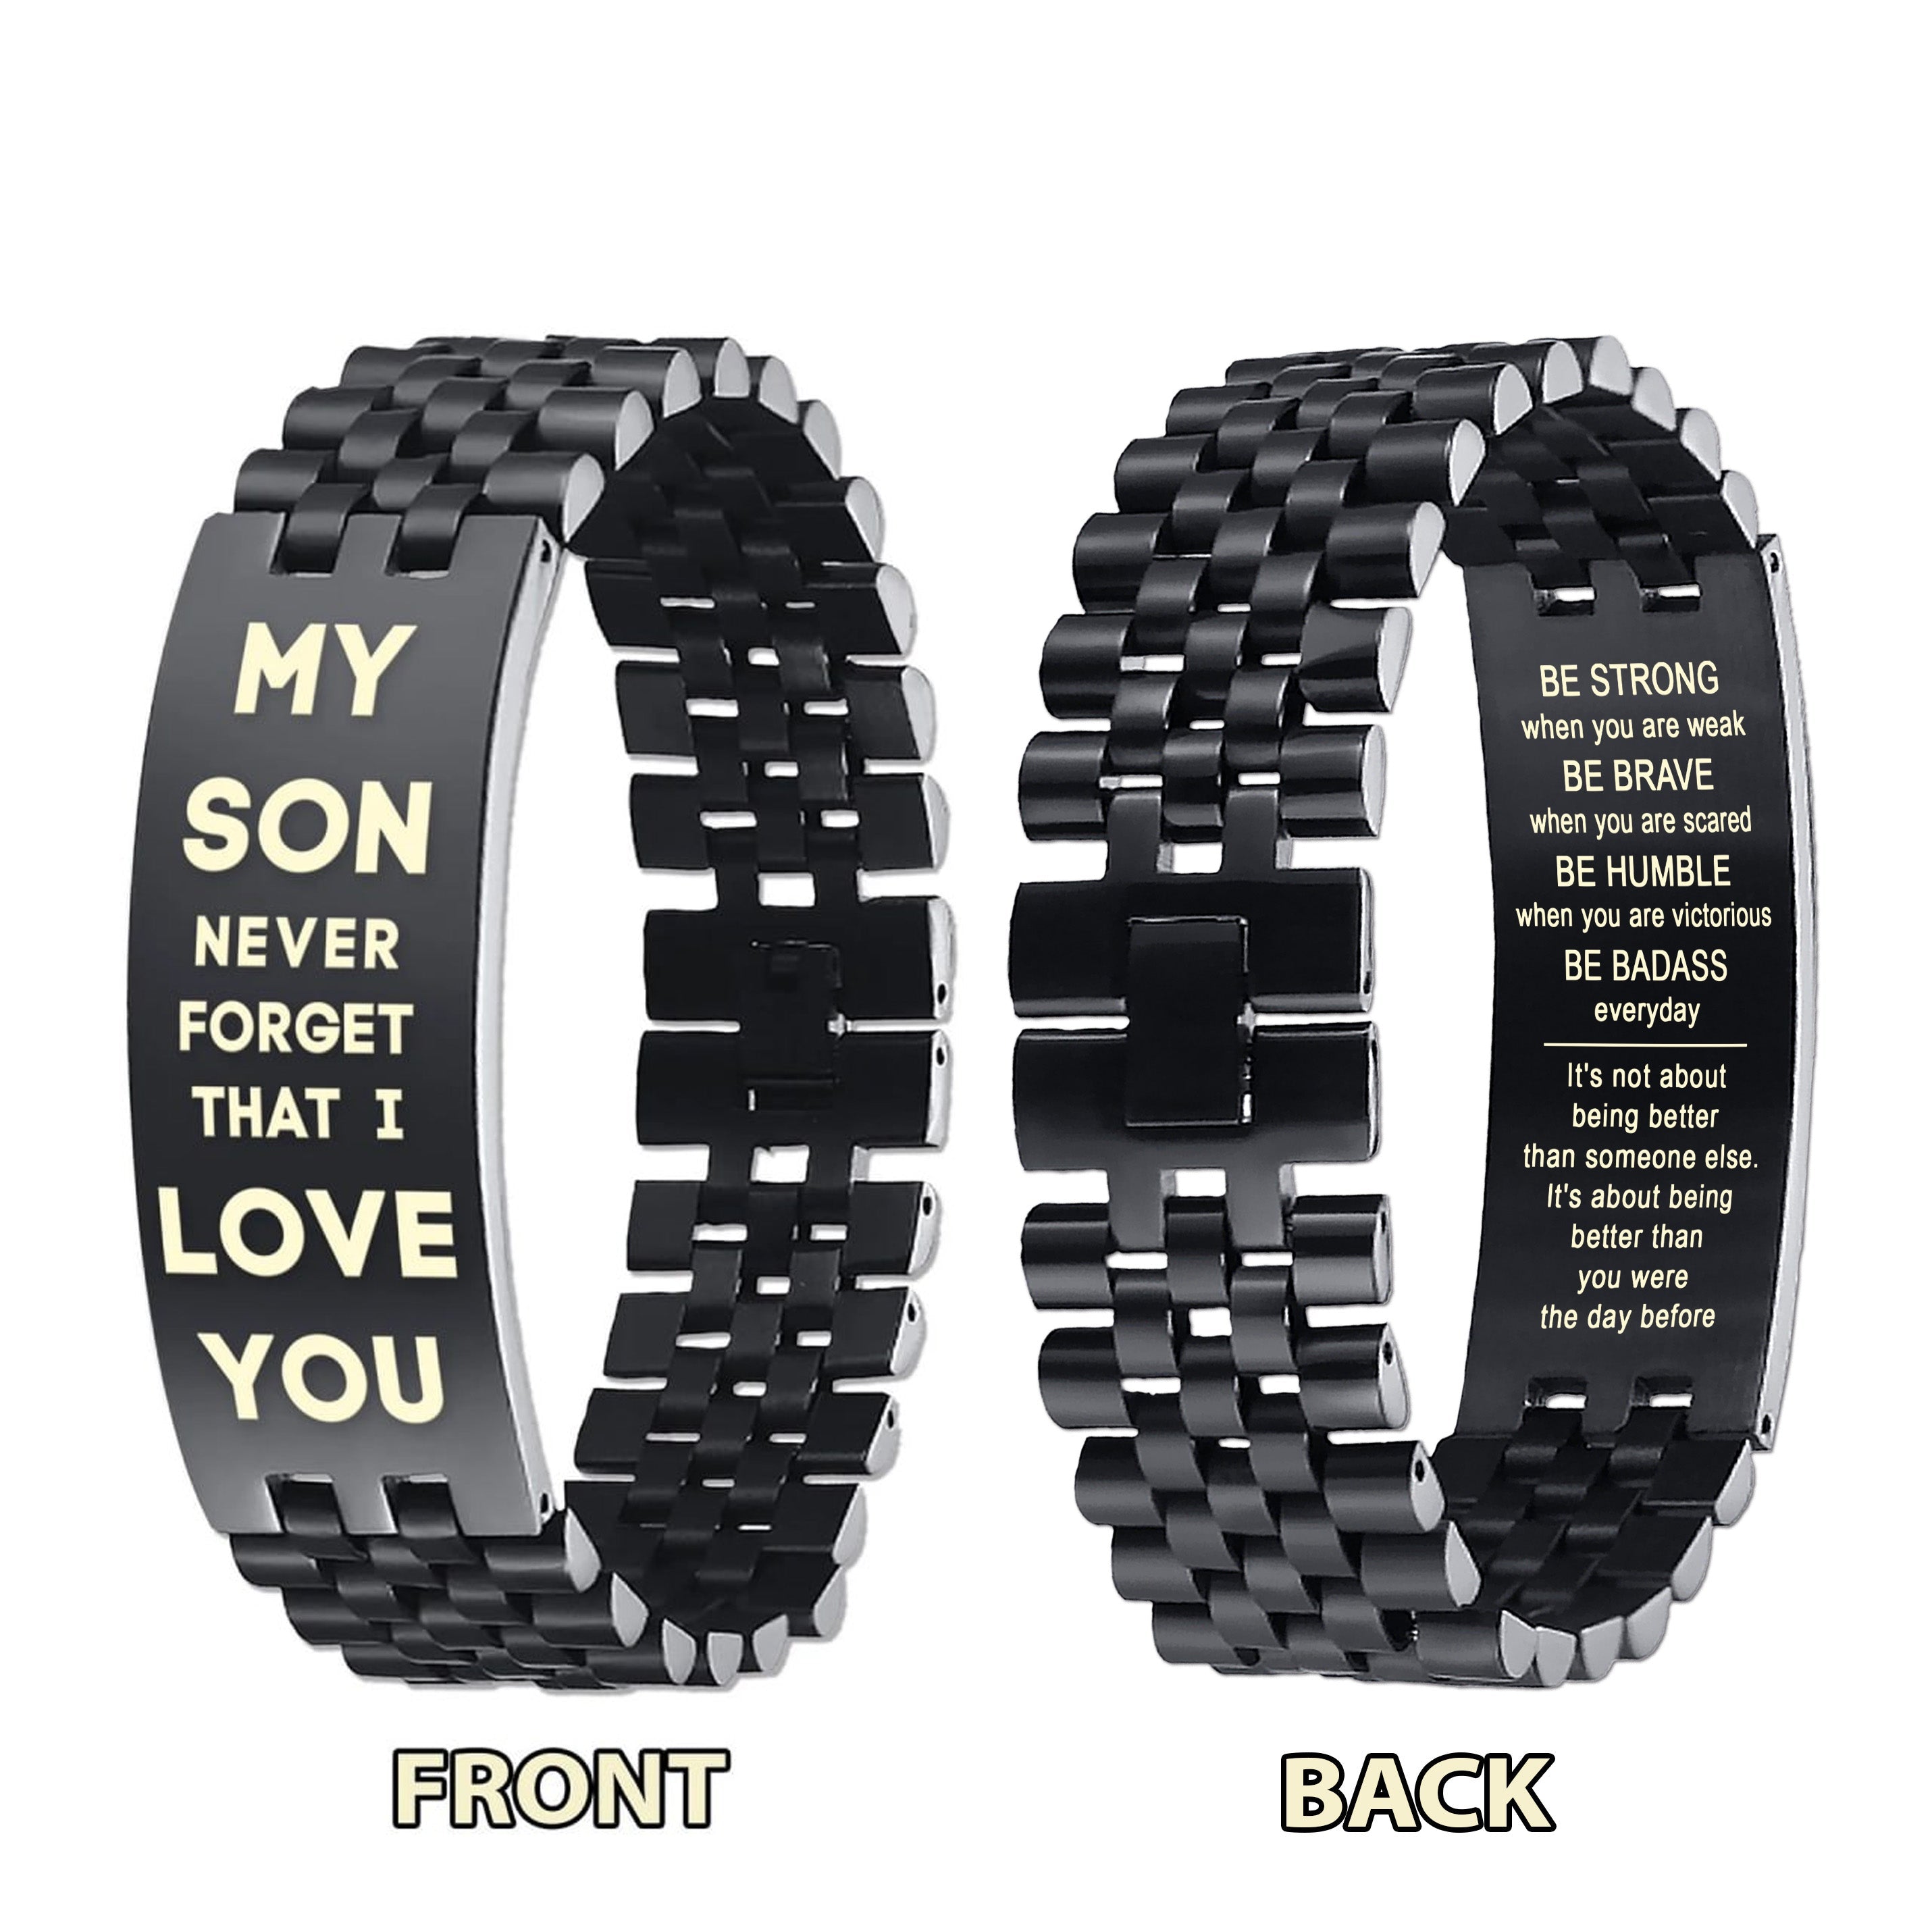 Family Bracelet Double Sided My Son Never Forget That I Love You, Braver